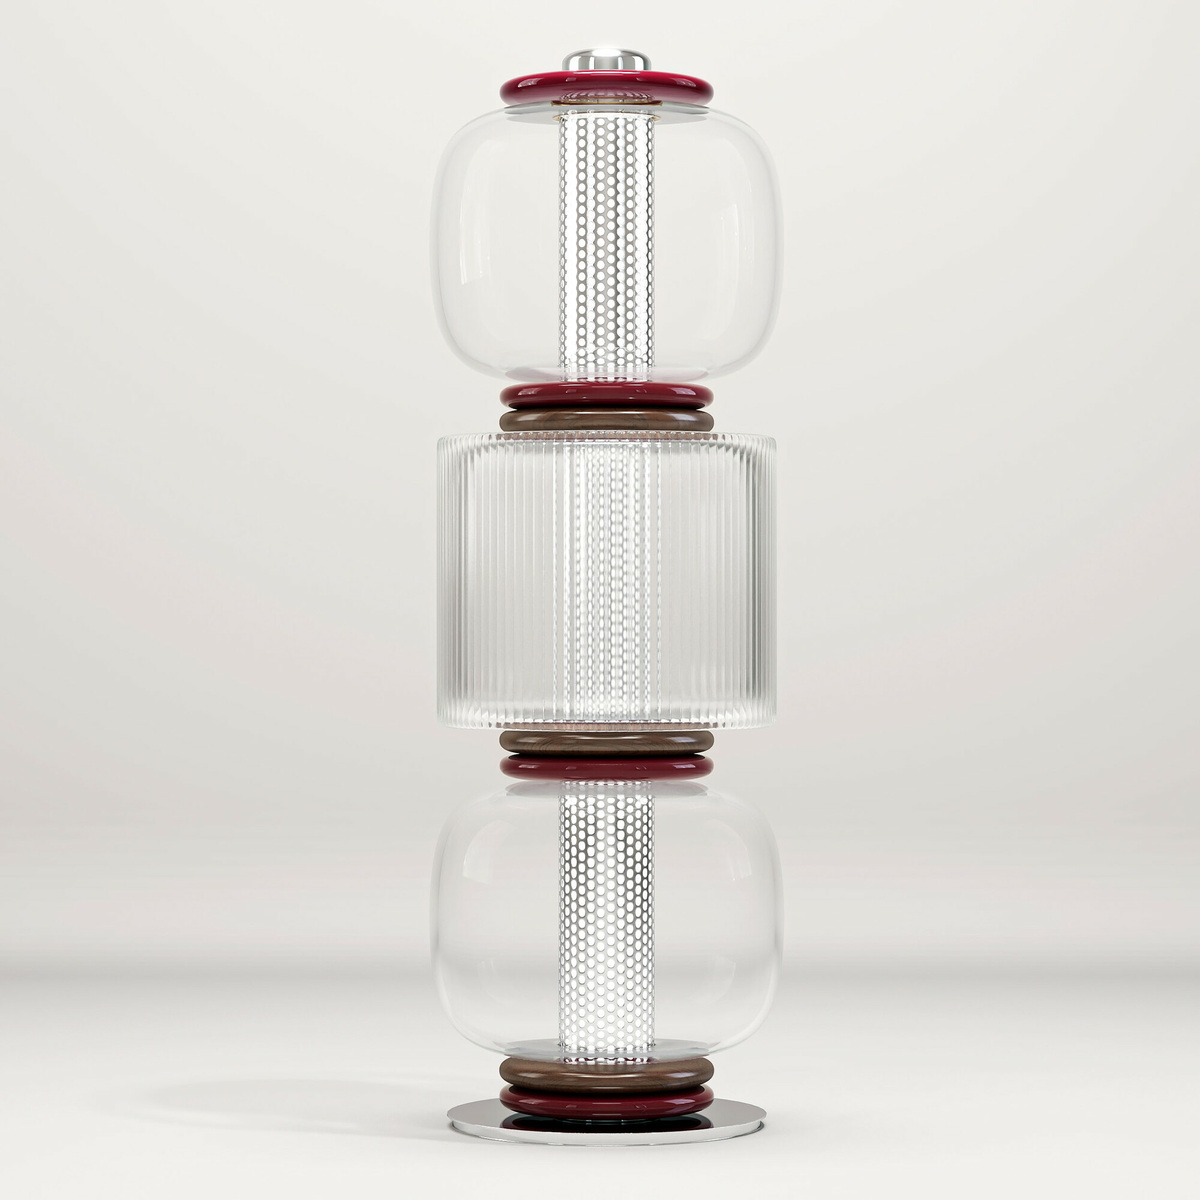 Floor lamp Loulou - 3 modules, Aubergine - H101 x ø34 cm - Blown glass/polished stainless steel - image 1